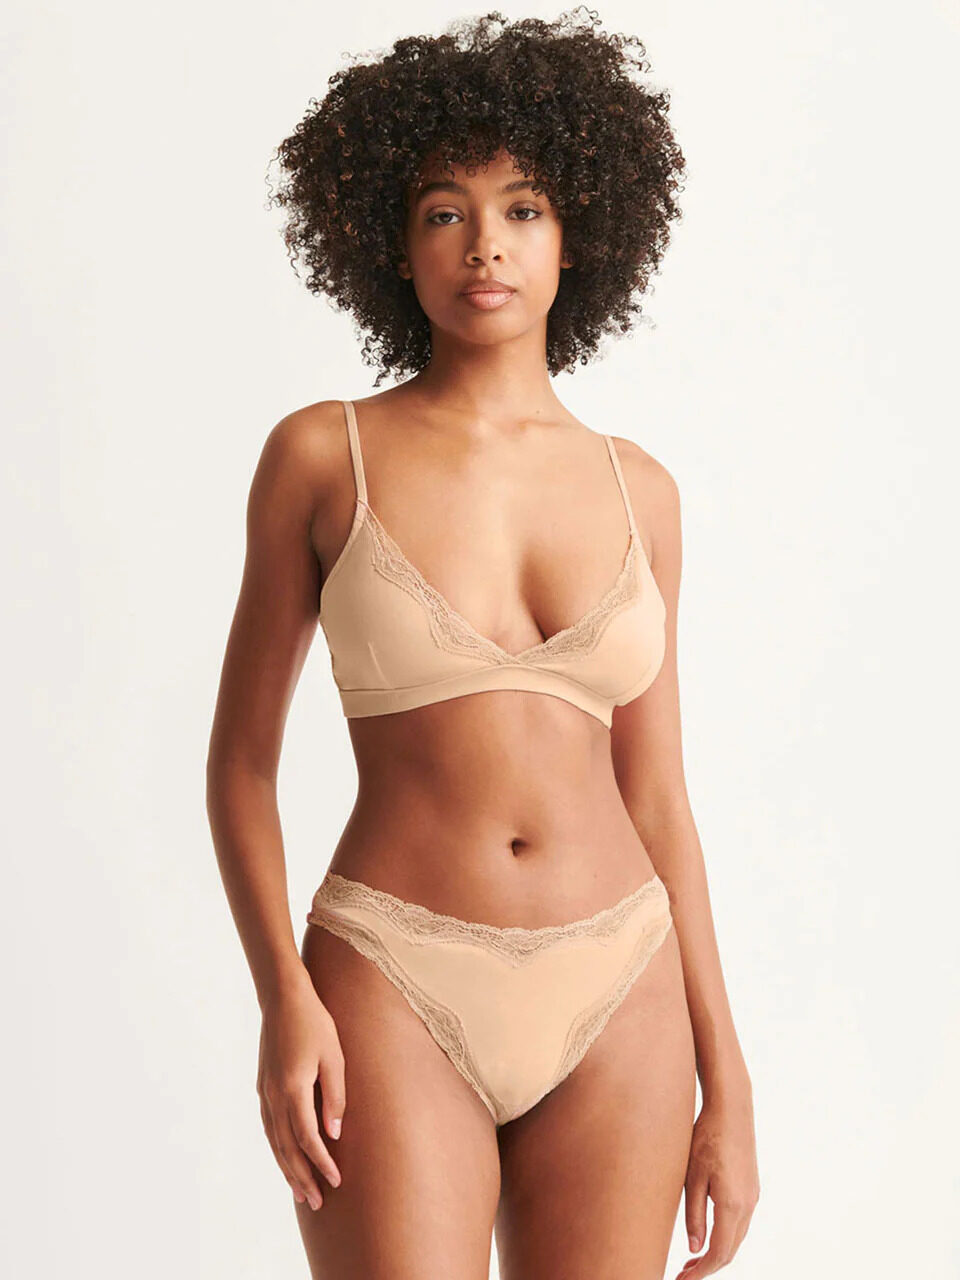 10 Sustainable Underwear Brands For Organic Lingerie (2024) - The Good Trade